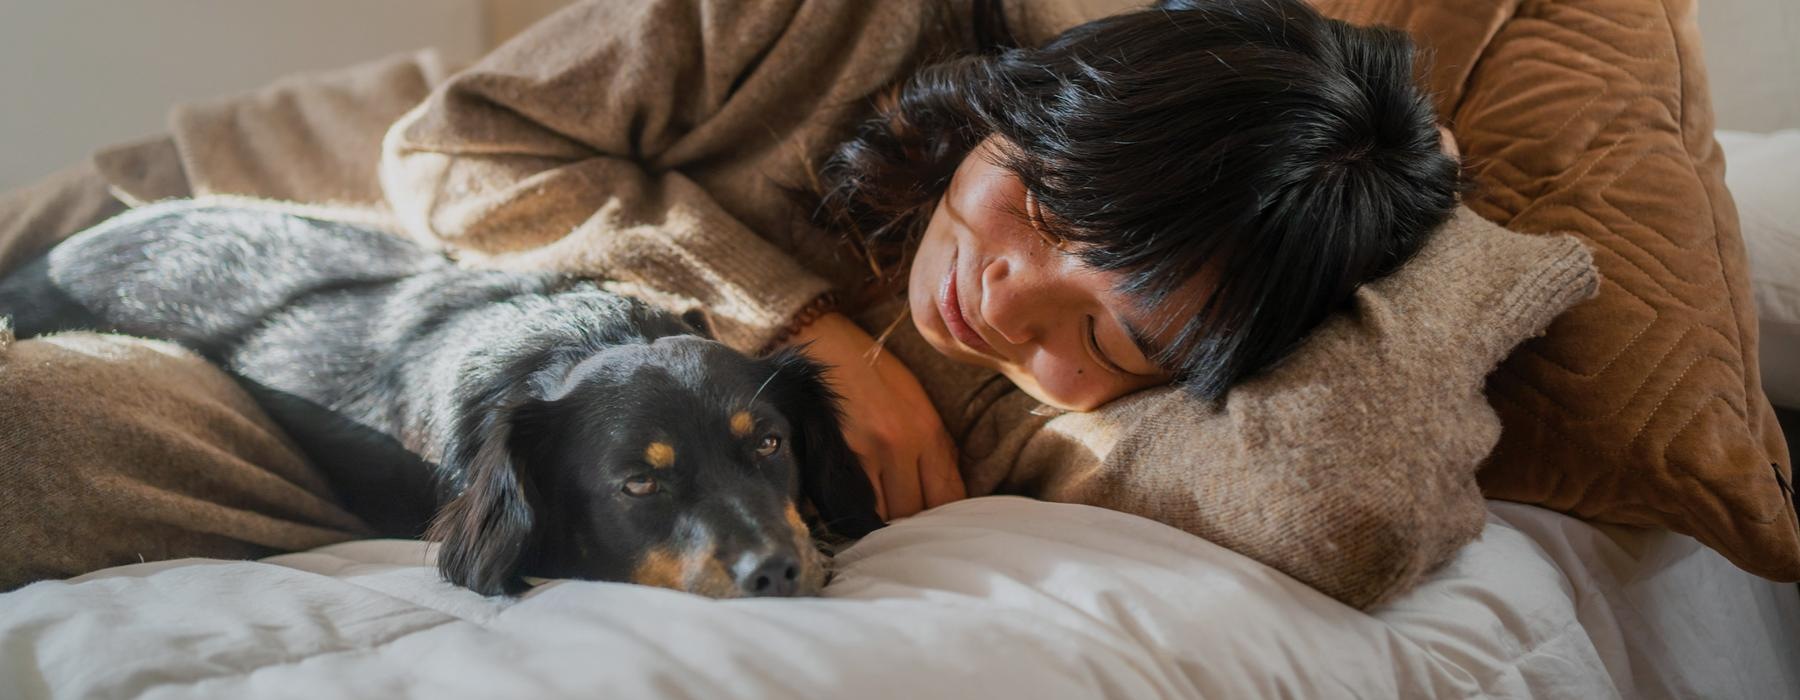 a person lying on a bed with a dog